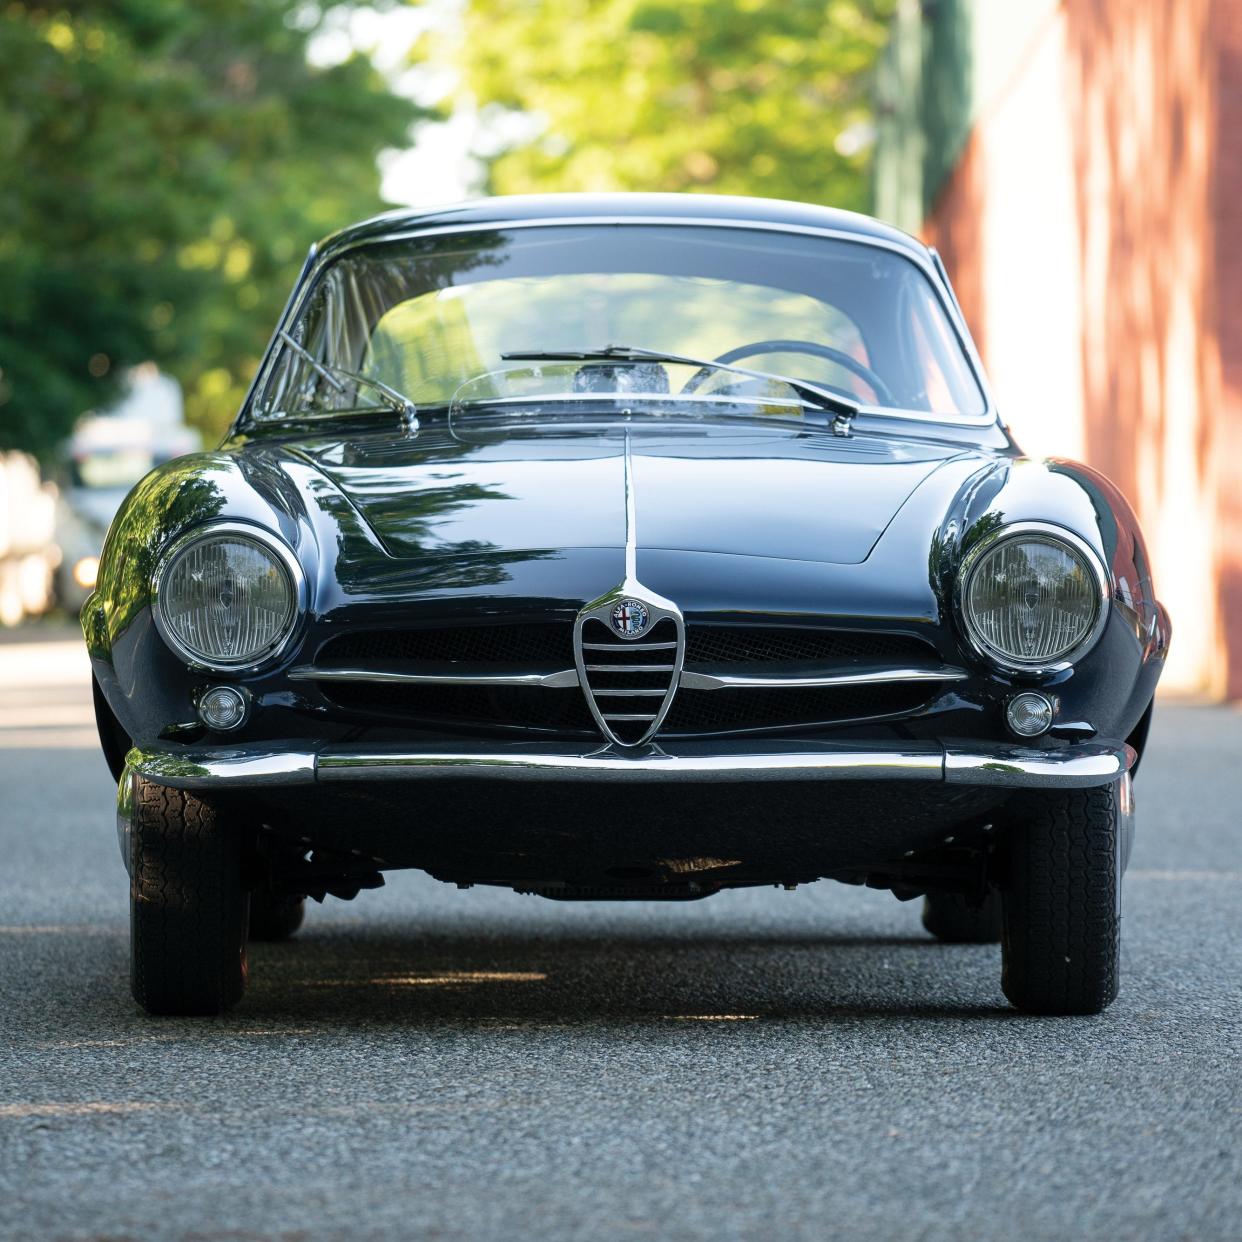 This Alfa Romeo is a high point for Bertone, a styling house that designed some of the most beautiful cars of all time - Erik Fuller ©2018 Courtesy of RM Sotheby's